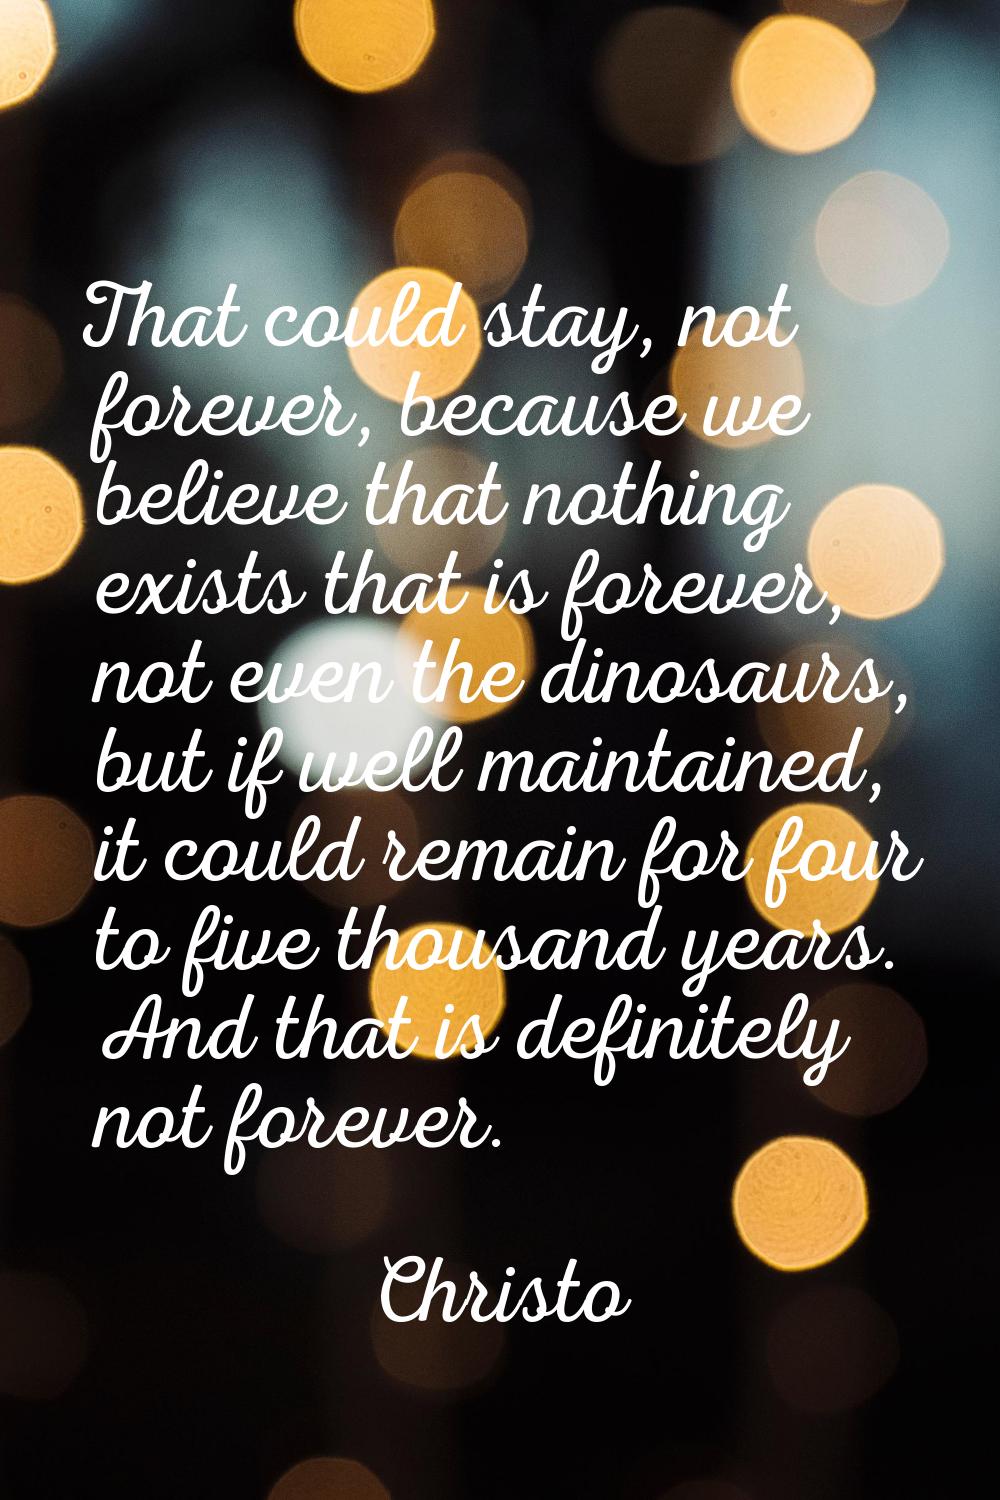 That could stay, not forever, because we believe that nothing exists that is forever, not even the 